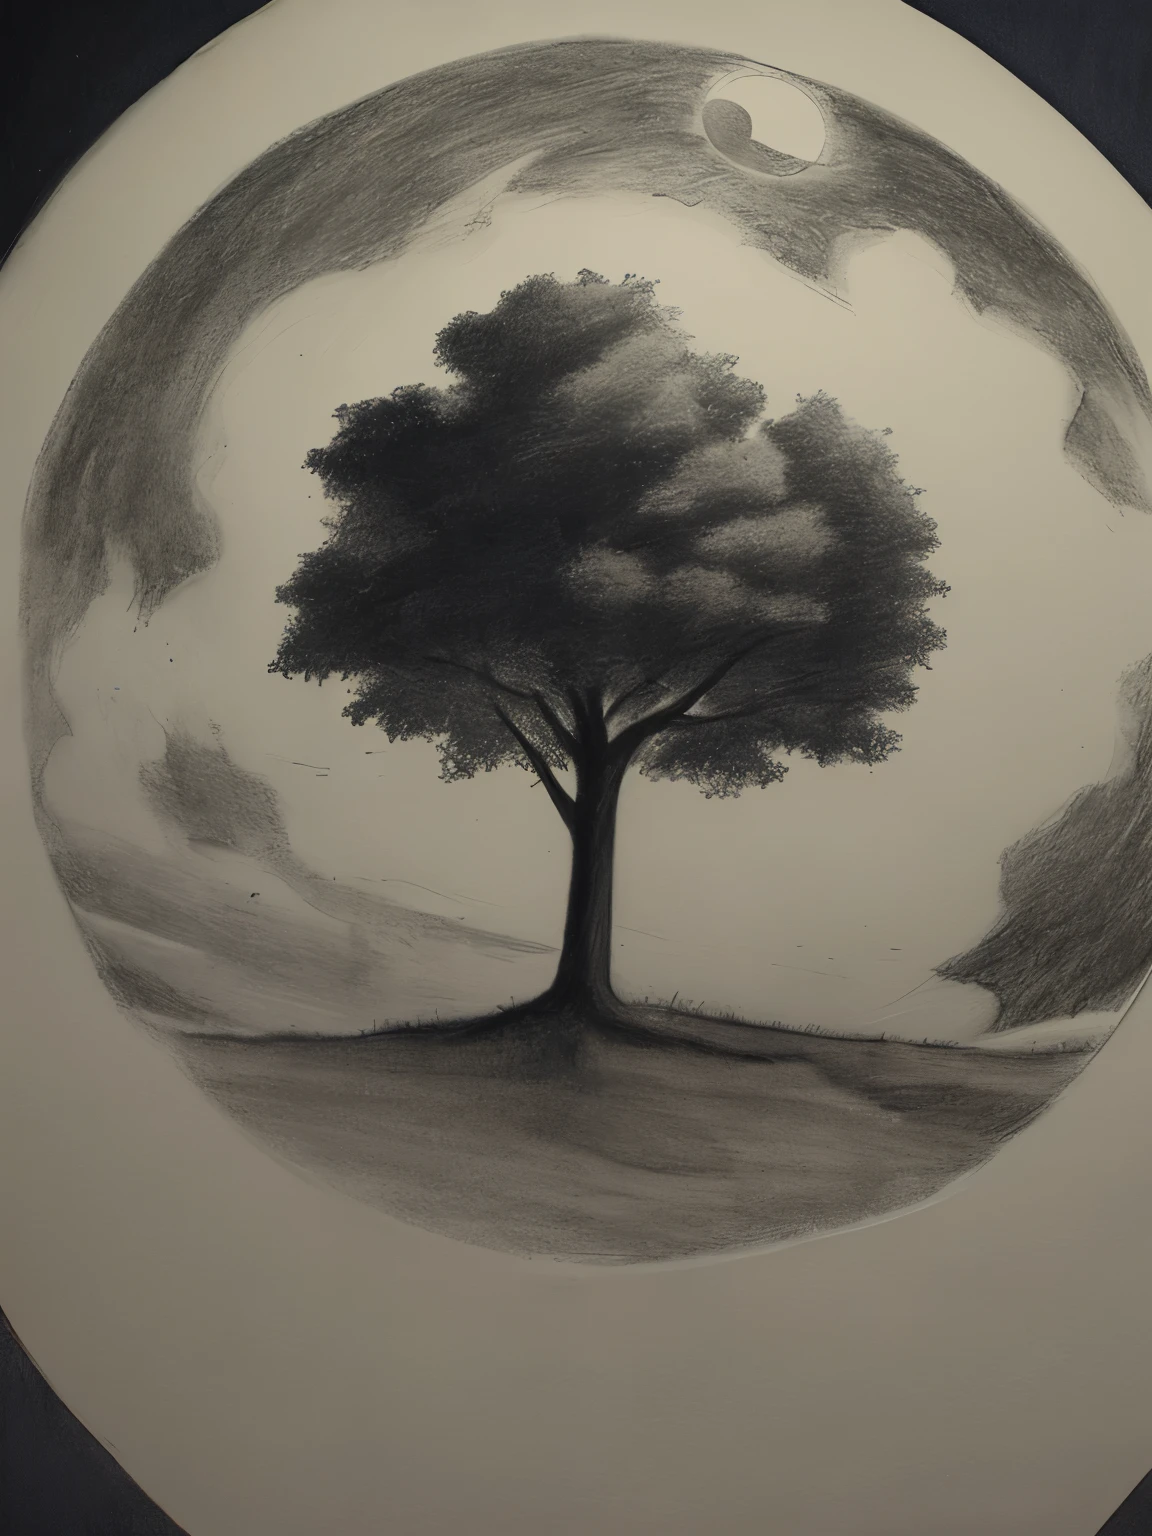 masterpiece, a drawing of a full moon with trees in the foreground dark sky and clouds in the background, (a charcoal drawing)  